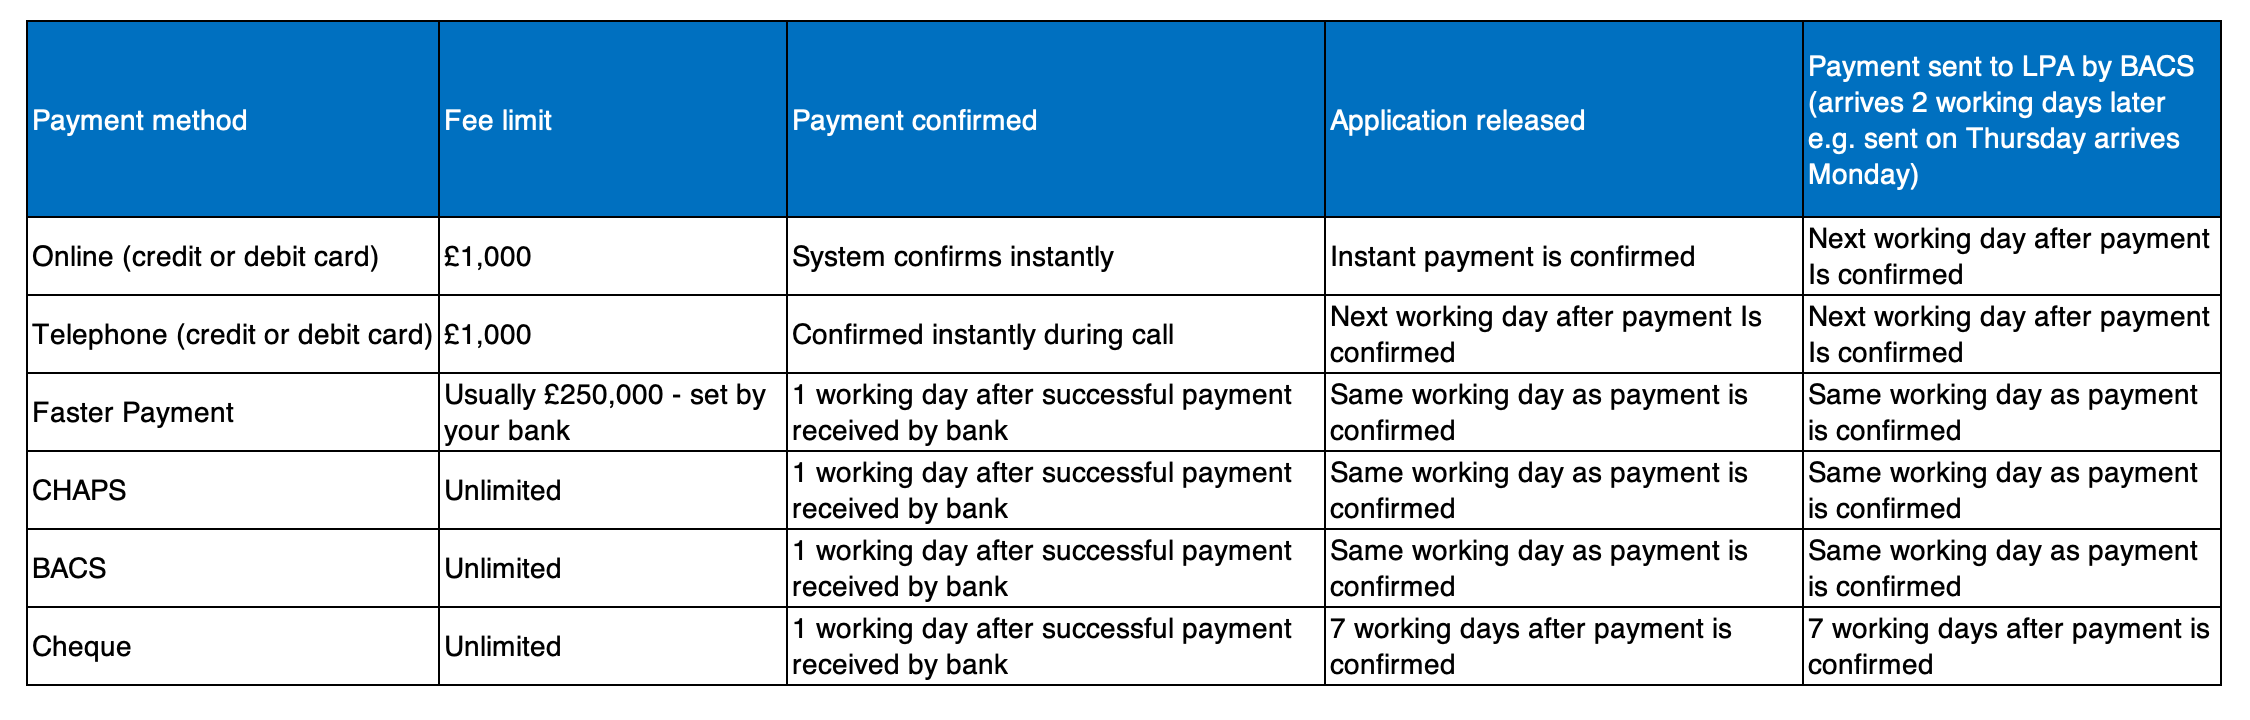 Table showing payment processing times